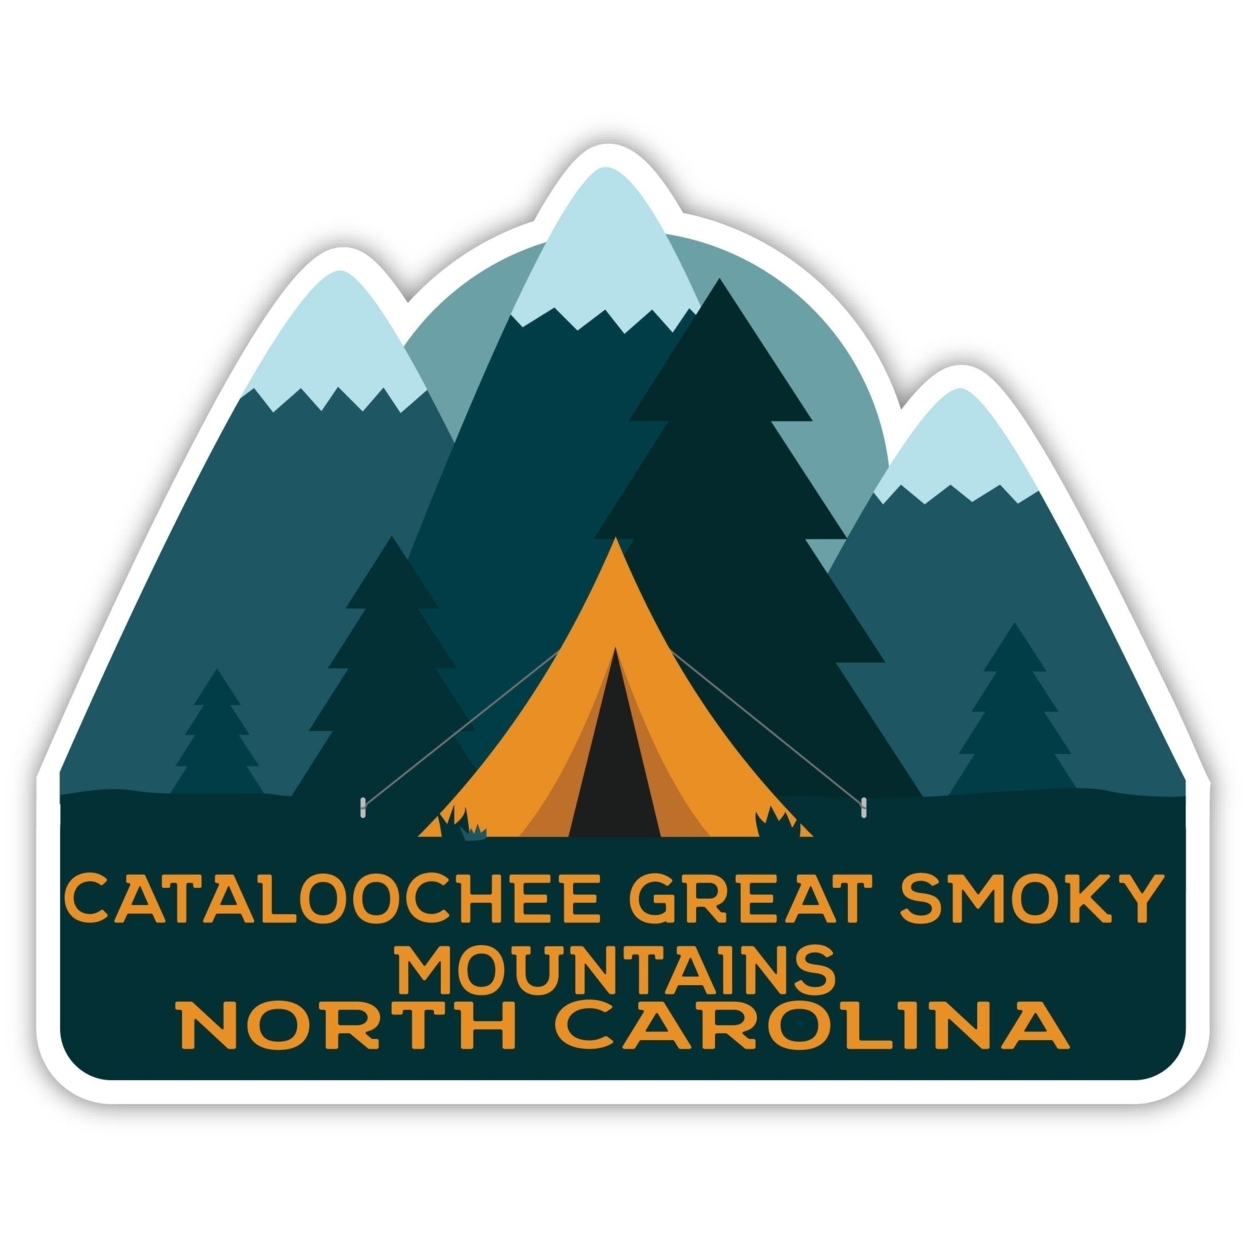 Cataloochee Great Smoky Mountains North Carolina Souvenir Decorative Stickers (Choose Theme And Size) - 4-Pack, 10-Inch, Tent